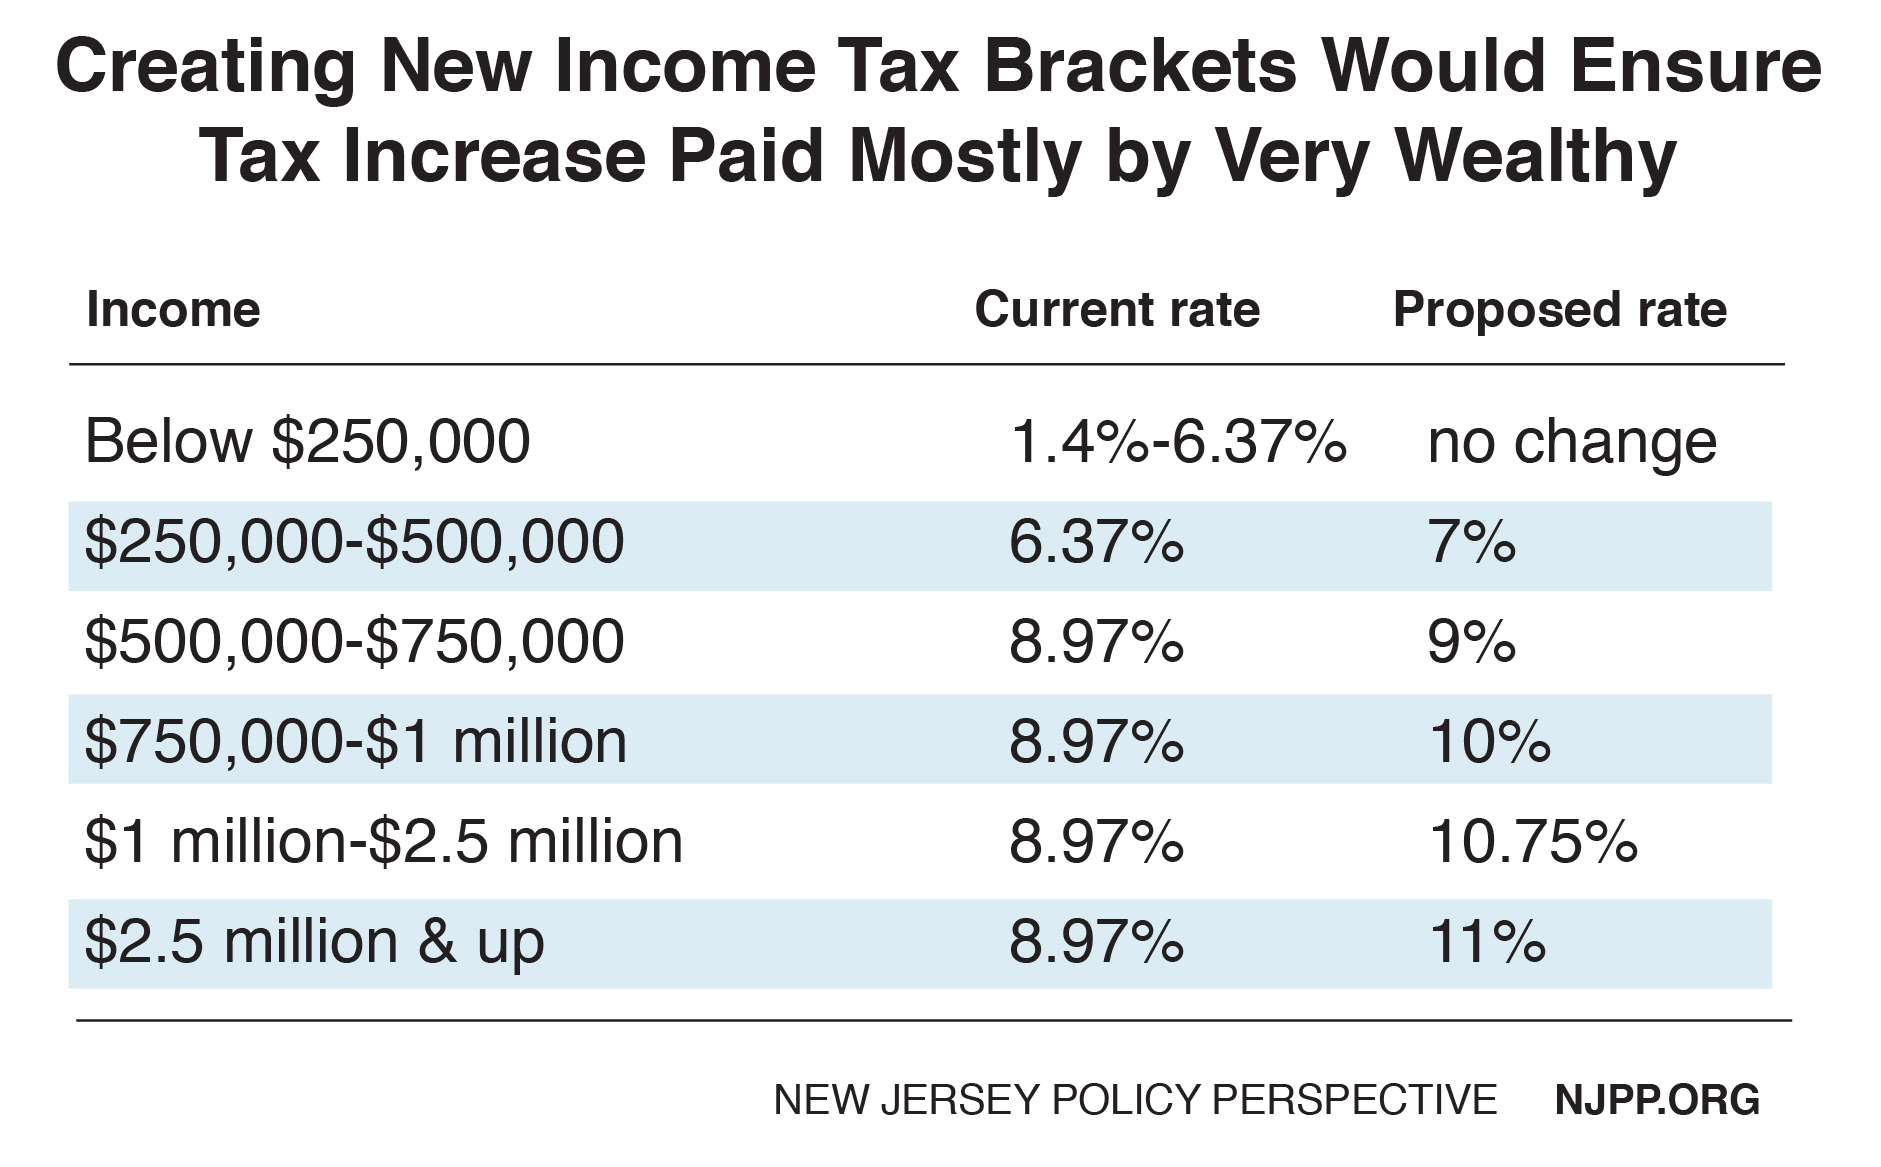 Reforming New Jersey's Income Tax Would 